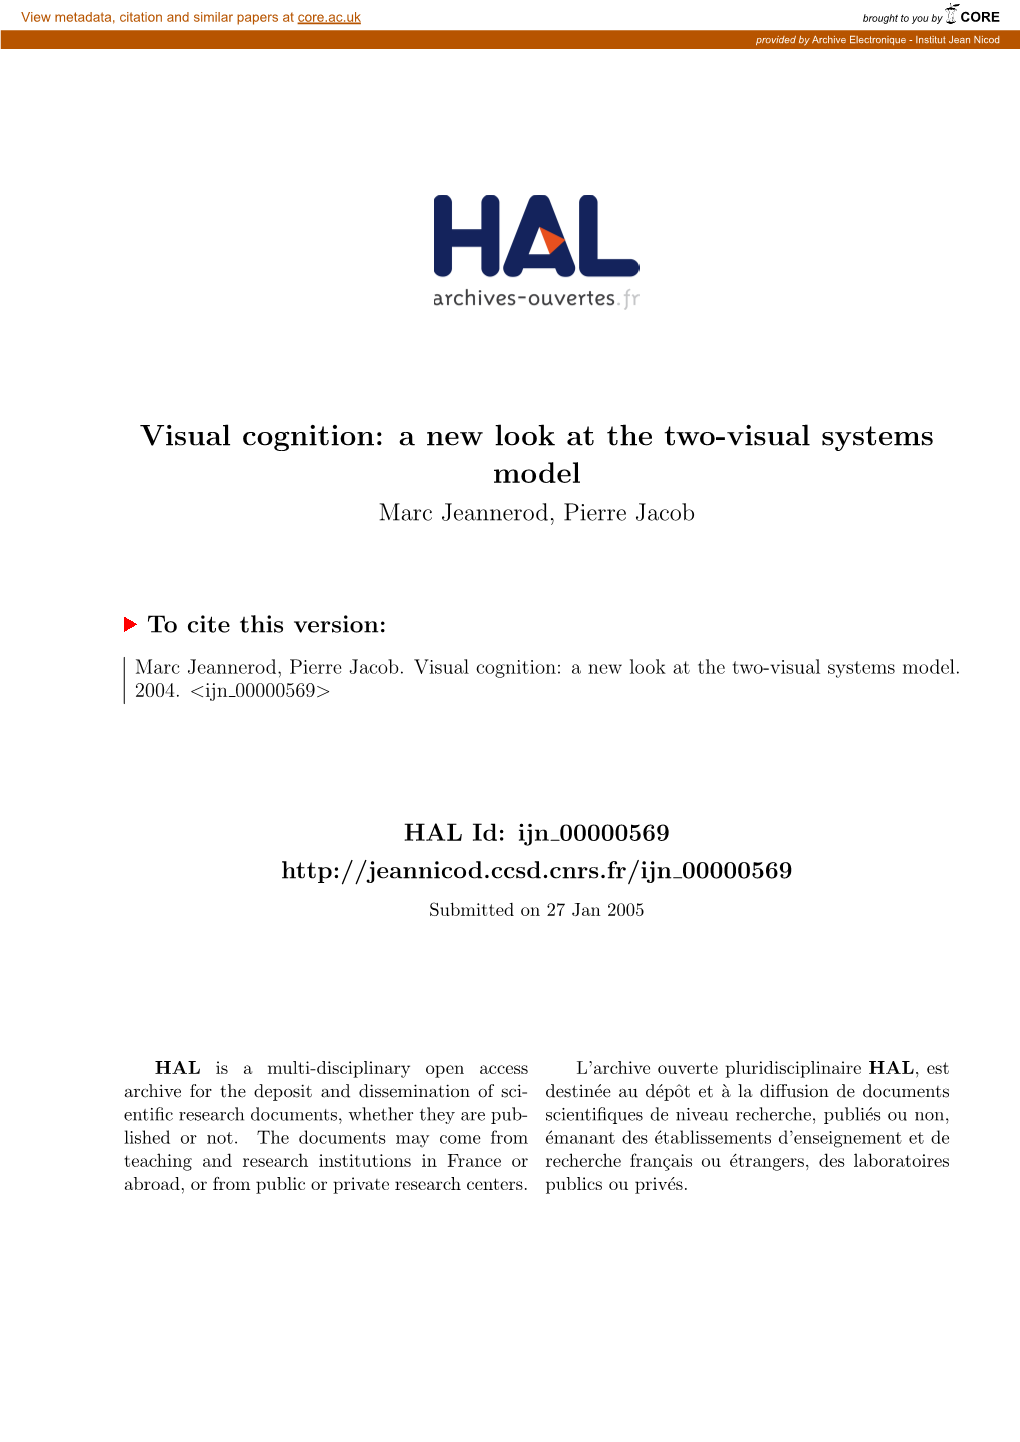 Visual Cognition: a New Look at the Two-Visual Systems Model Marc Jeannerod, Pierre Jacob